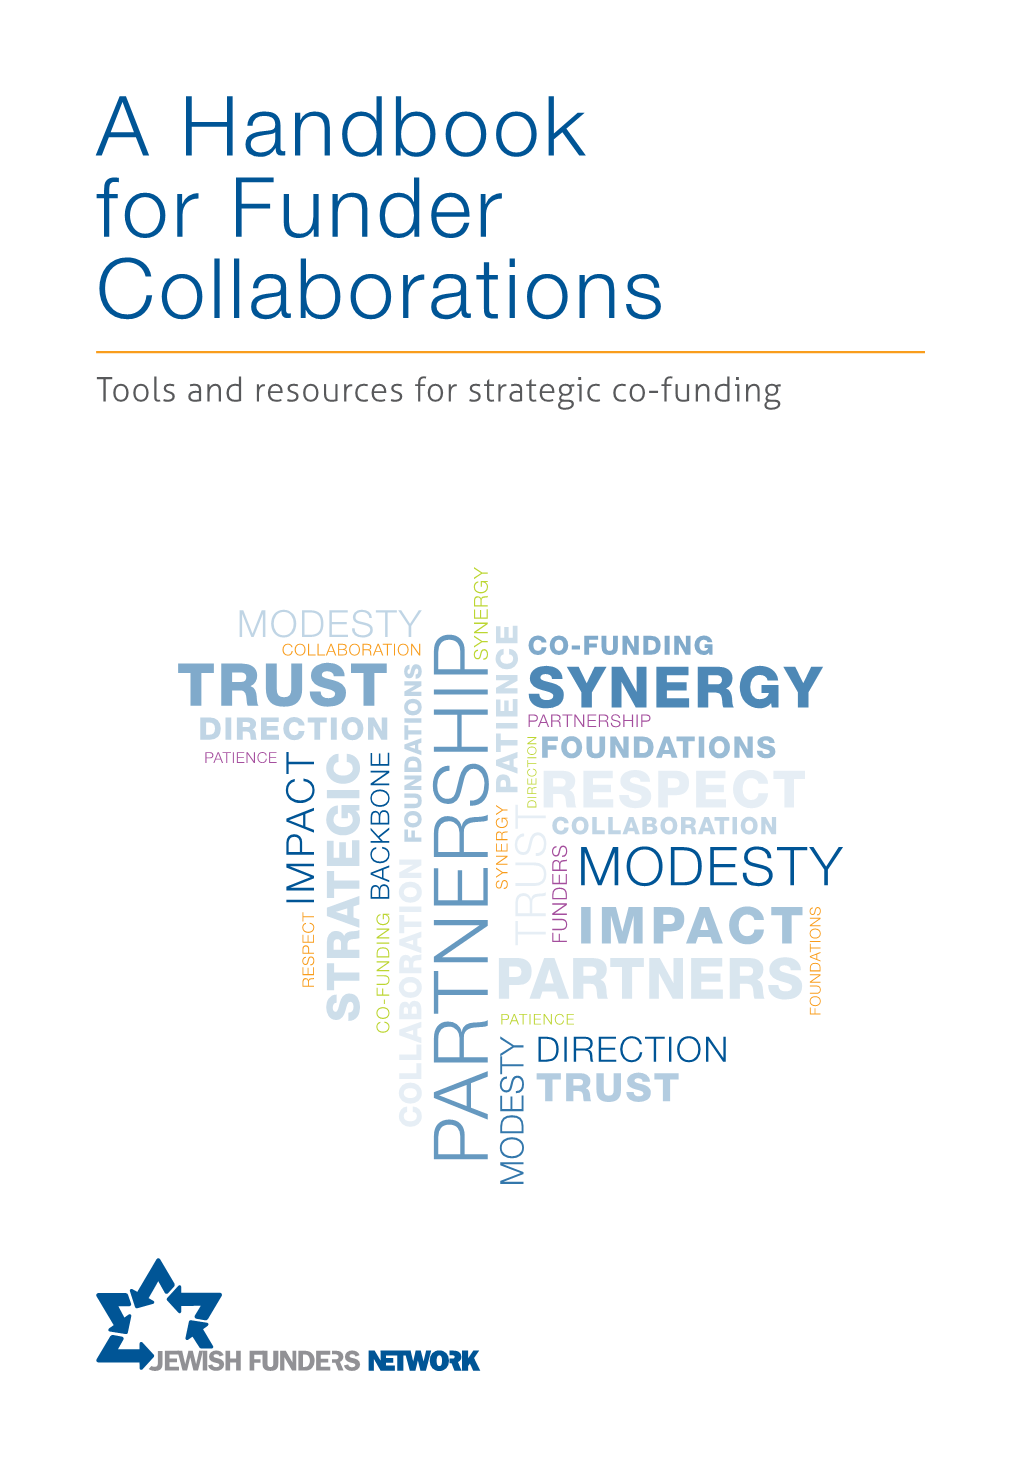 A Handbook for Funder Collaborations